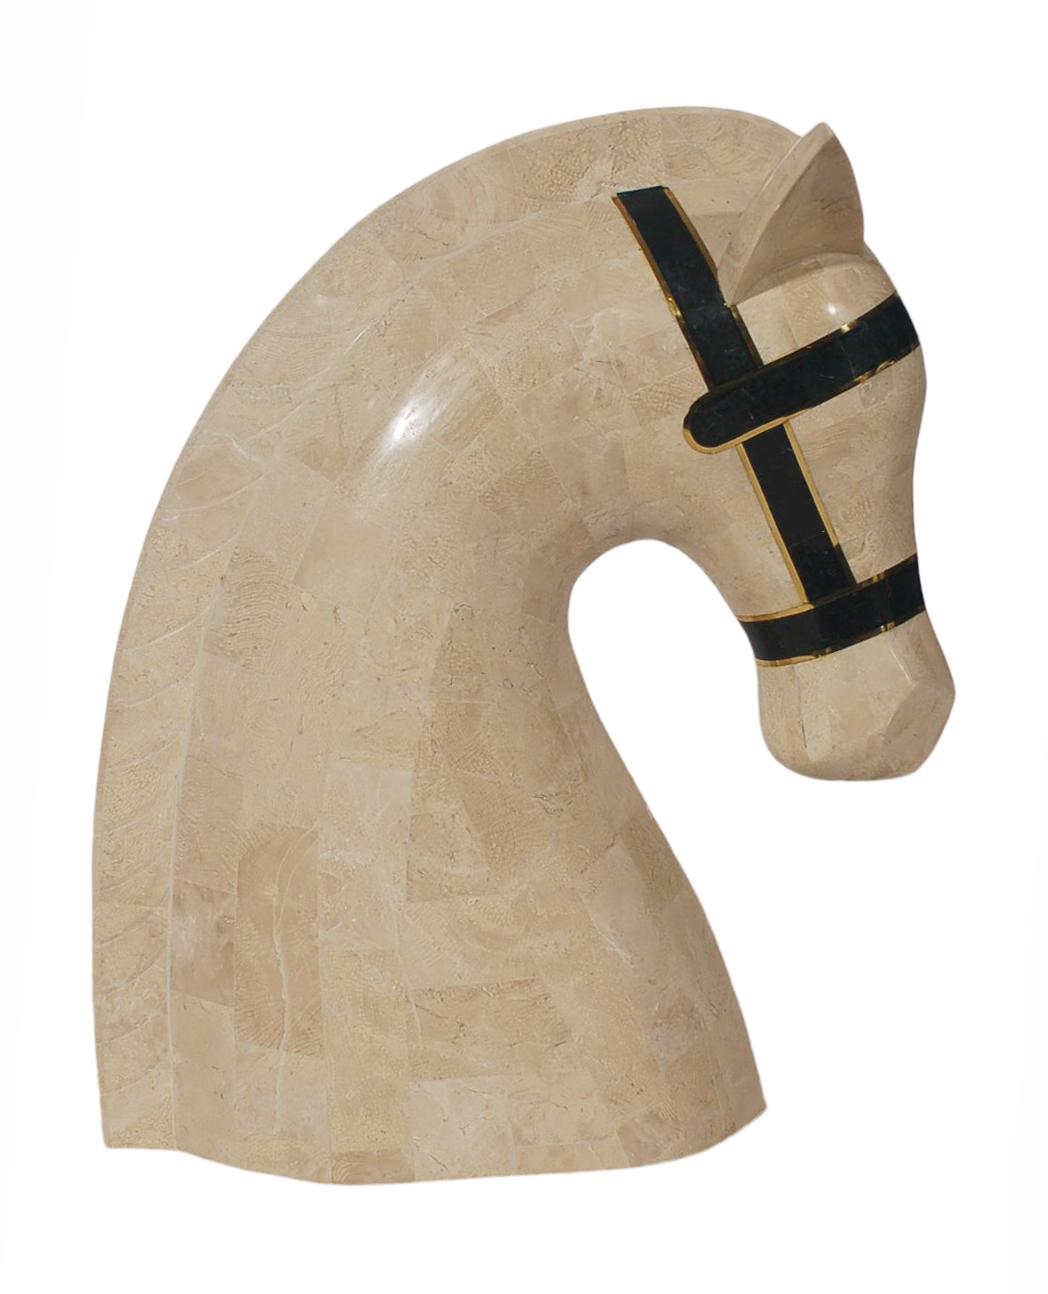 A chic and beautiful horse head figurine or table sculpture probably by Maitland Smith in the 1980s. It features a tessellated stone veneer in black and white with a brass inlay. Excellent condition.